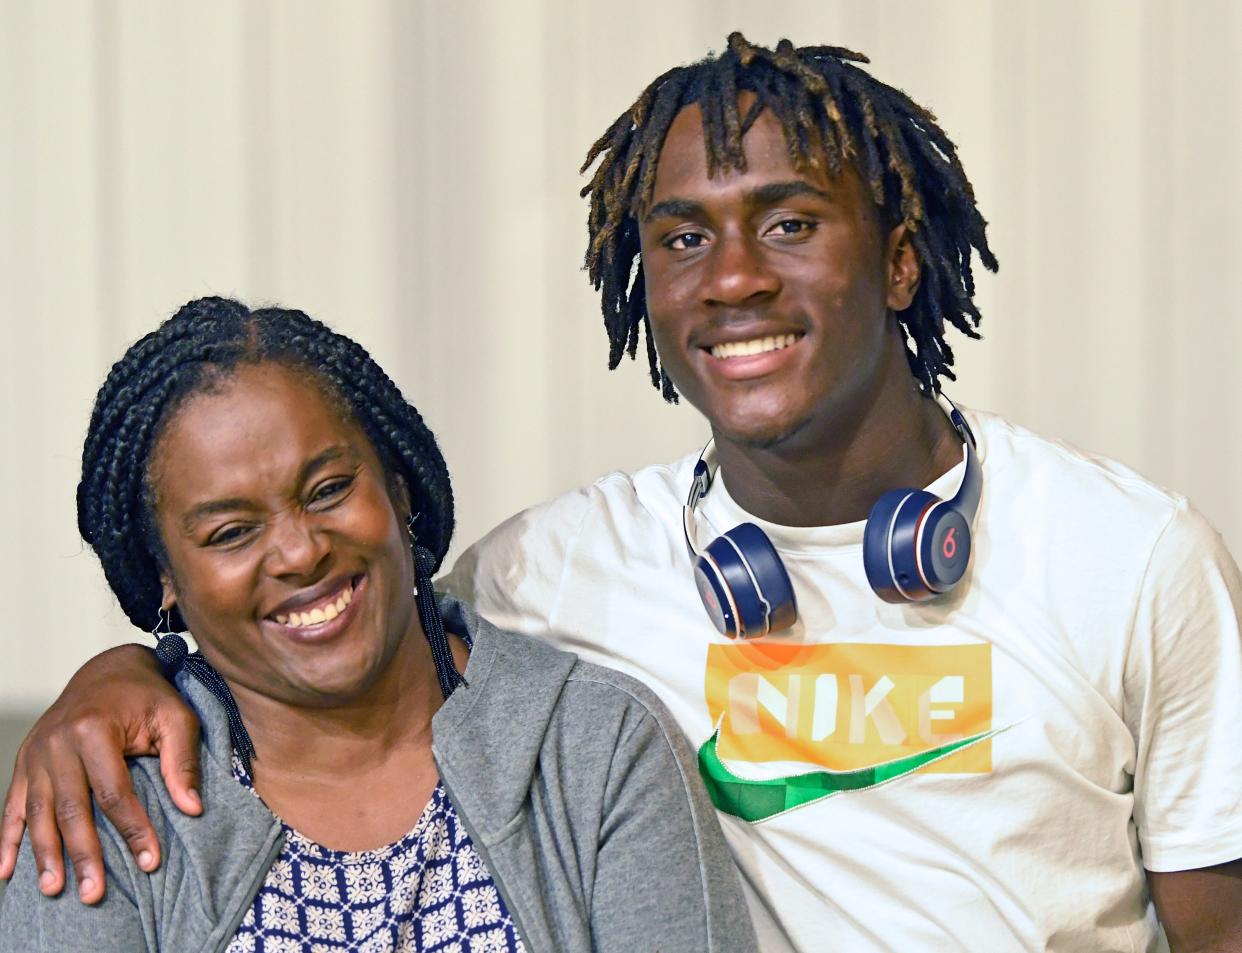 Coleia Thomas with her 16-year-old-son Isaiah Belt.